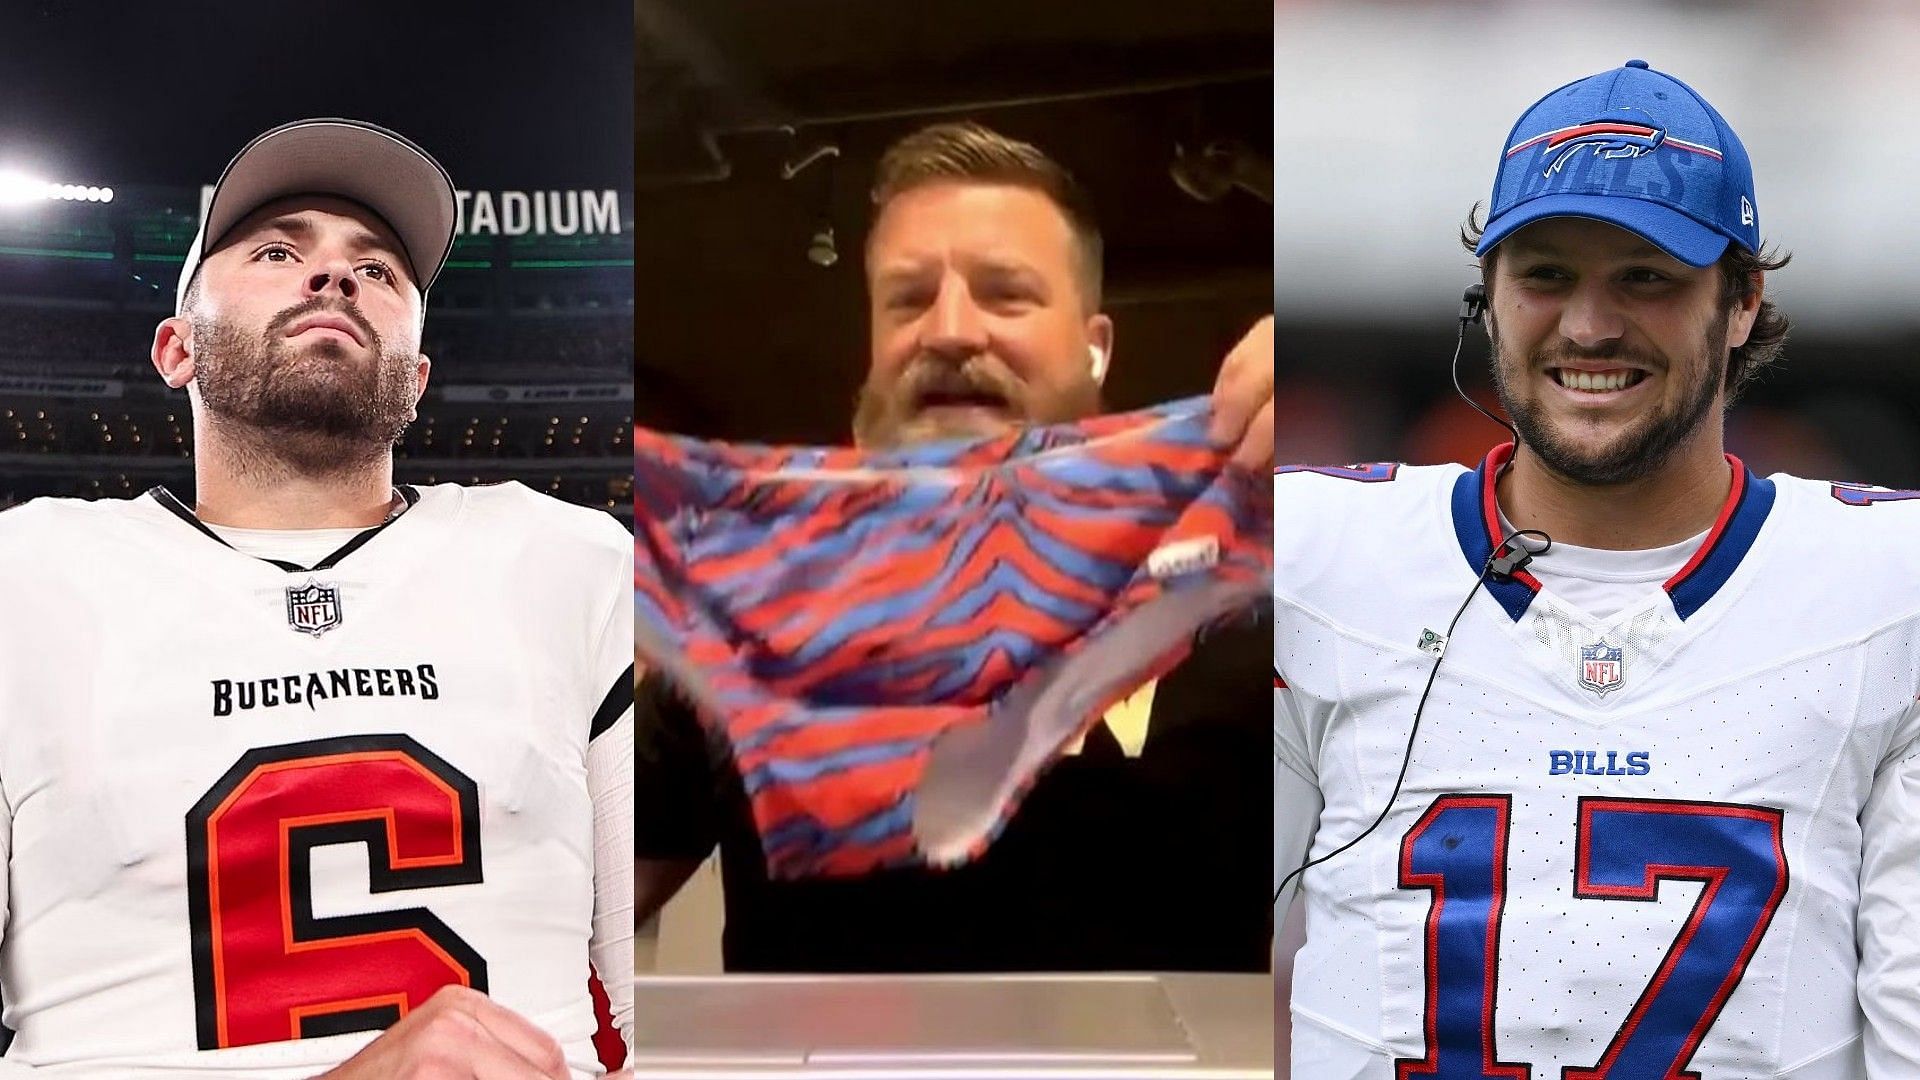 Ryan Fitzpatrick offers bizarre tease for showdown between Baker Mayfield and Josh Allen on Thursday Night Football - Courtesy of Kyle Brandt on Twitter